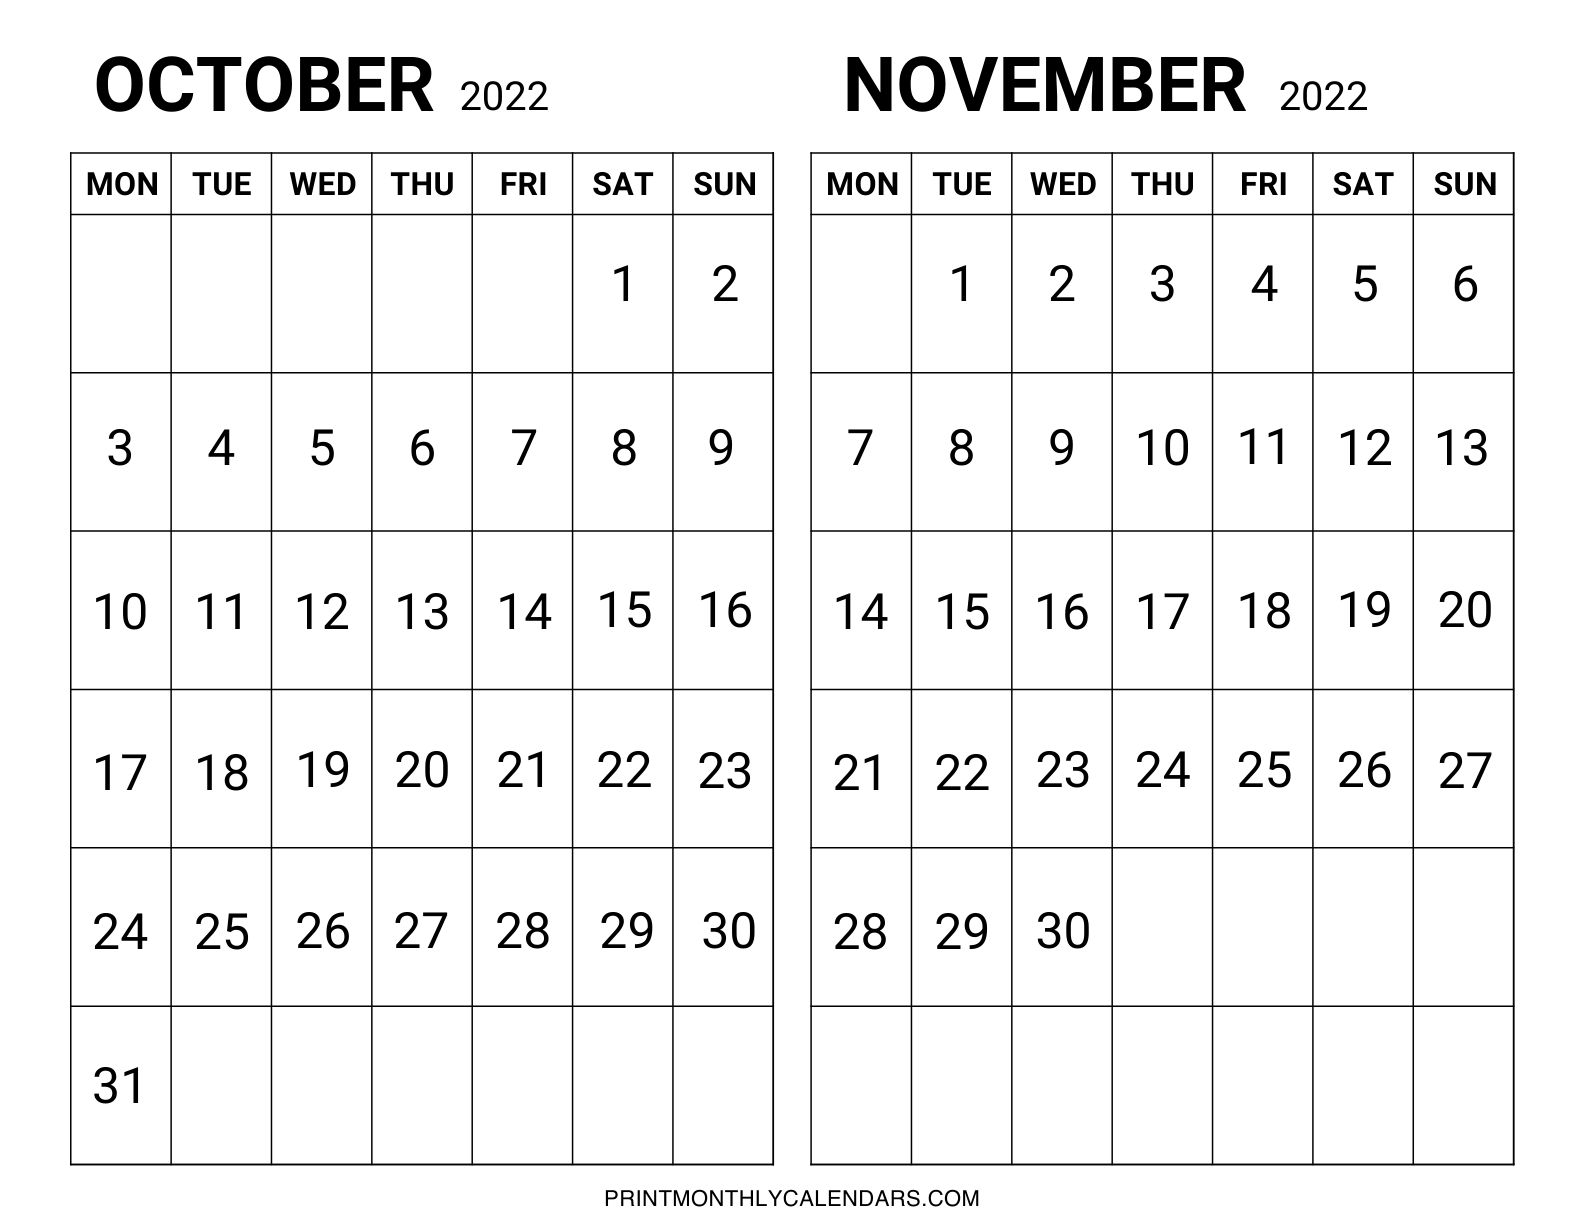 October and November 2022 calendar template which has landscape layout on one page. Weekdays are starting from Monday.